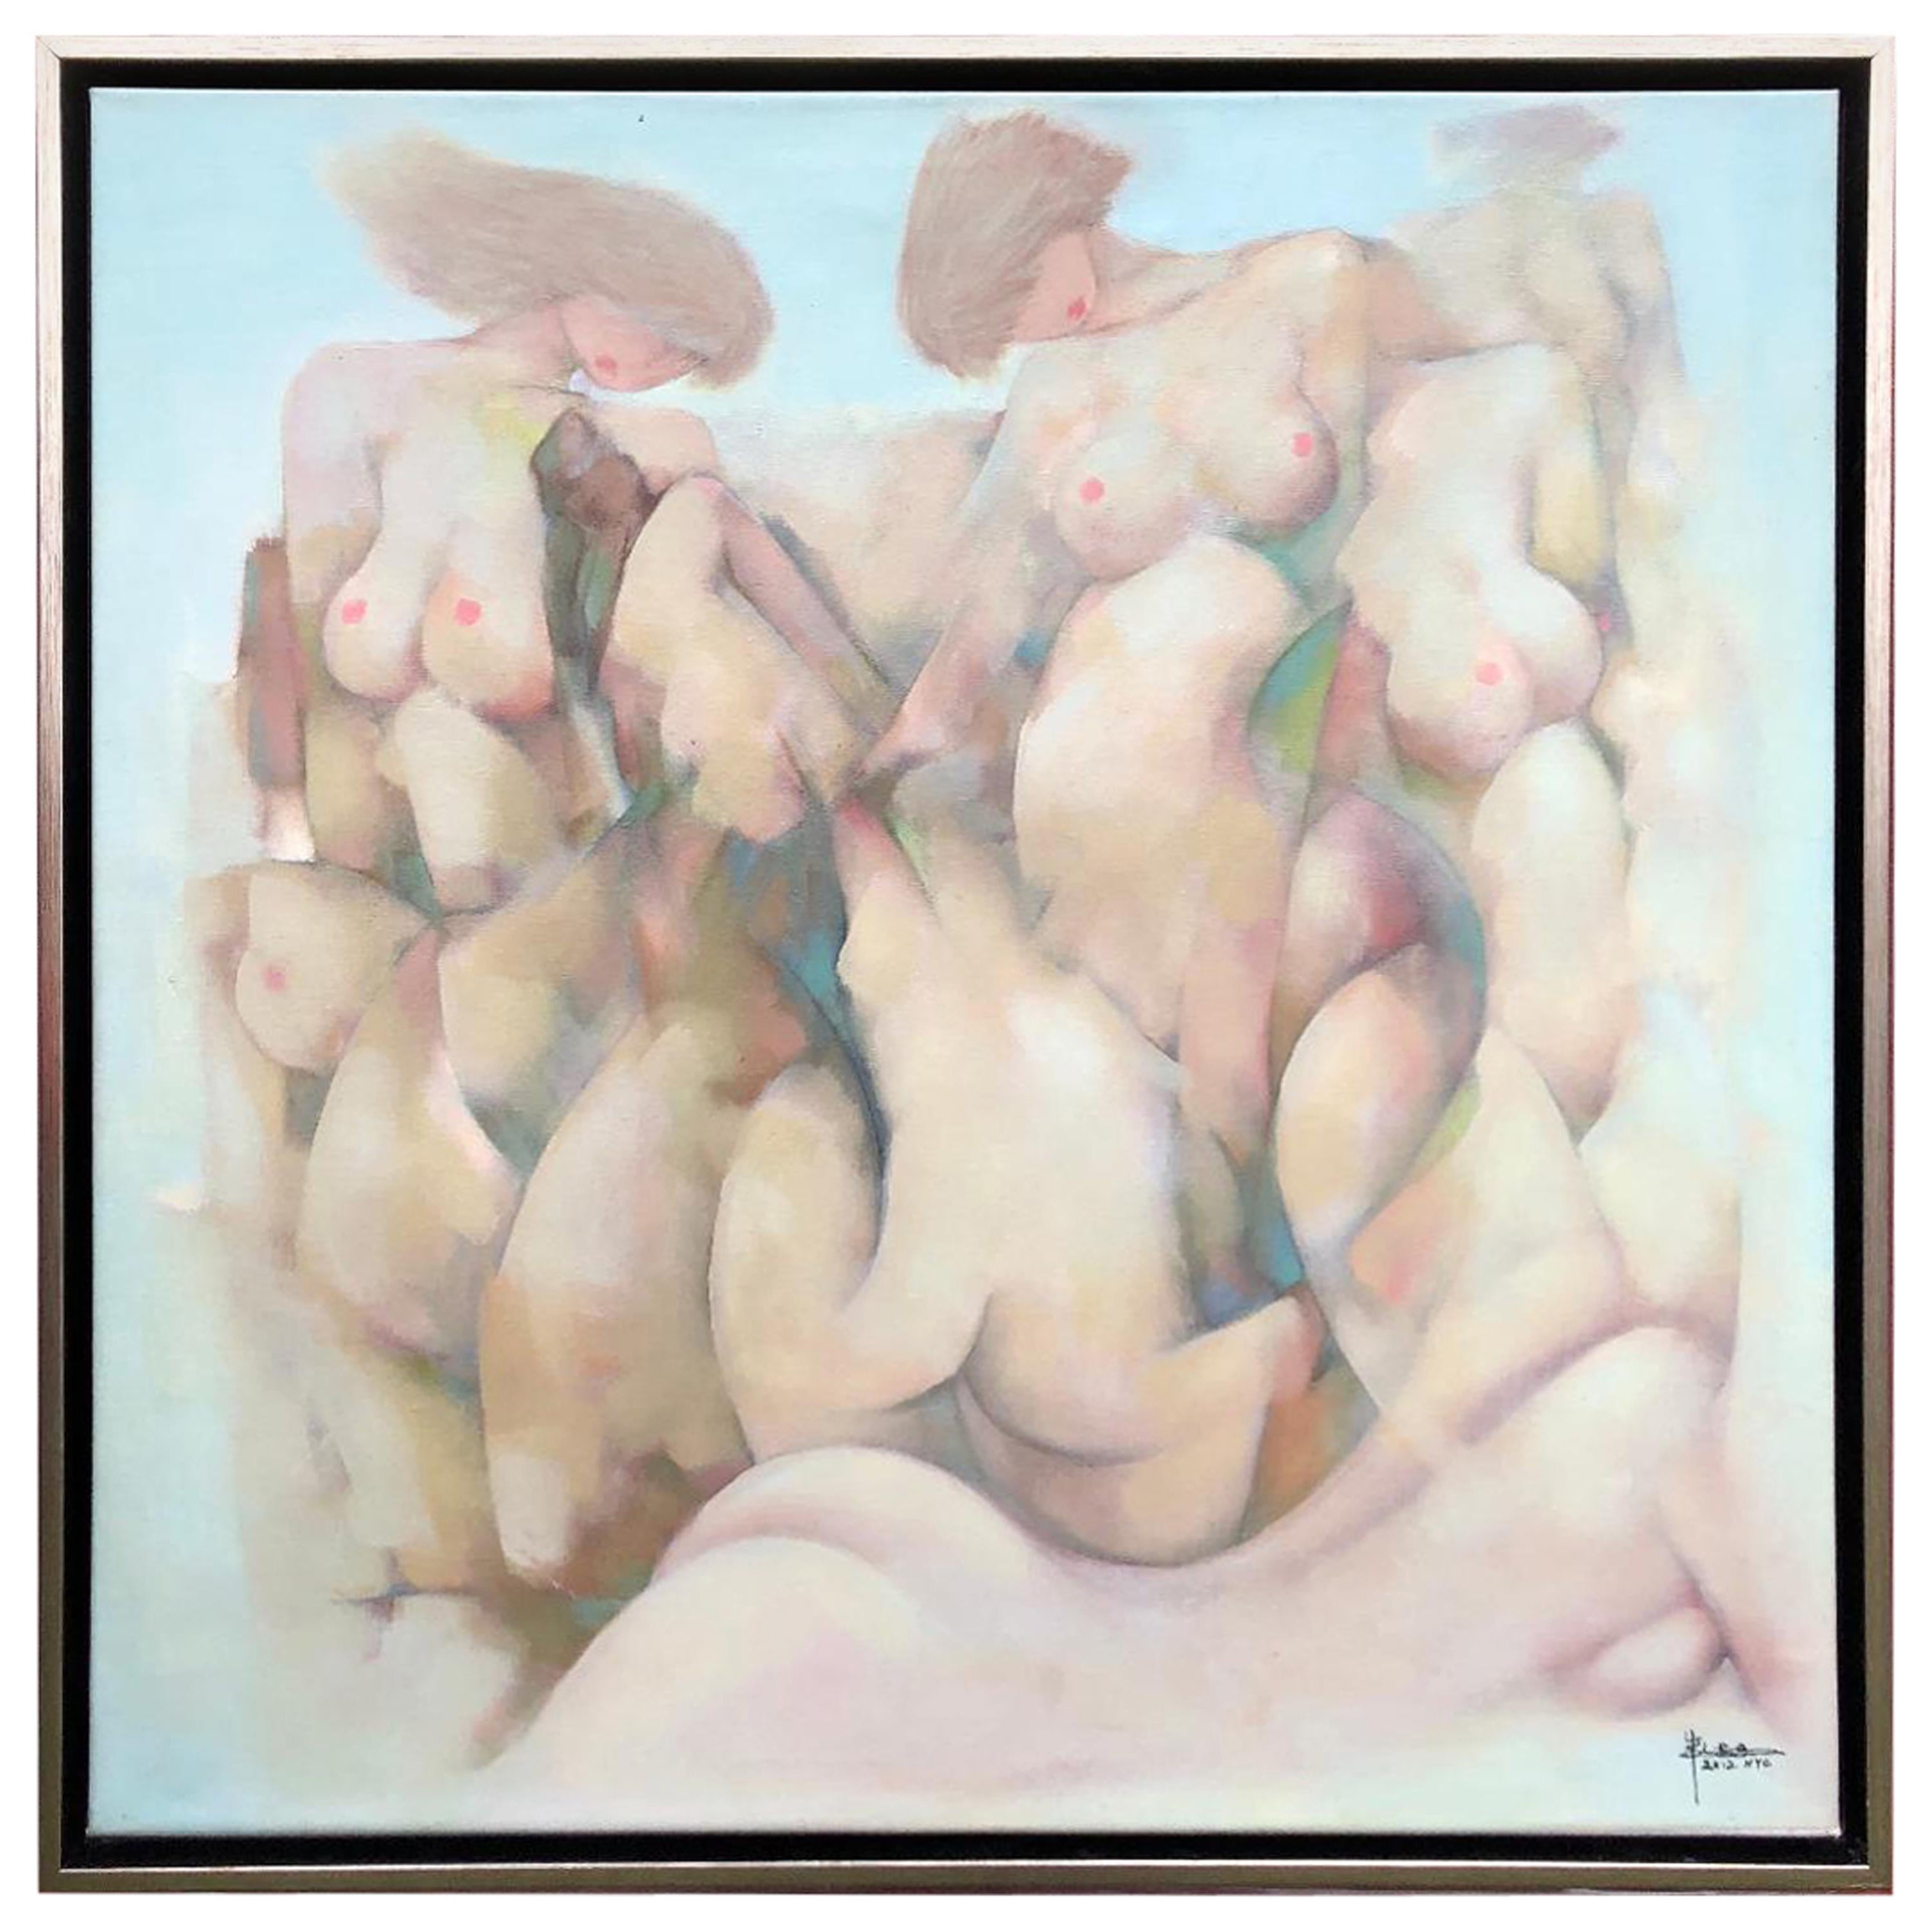 Modern Surrealist Chinese Artist Zhu Zhechi Oil on Canvas Nude Females Painting